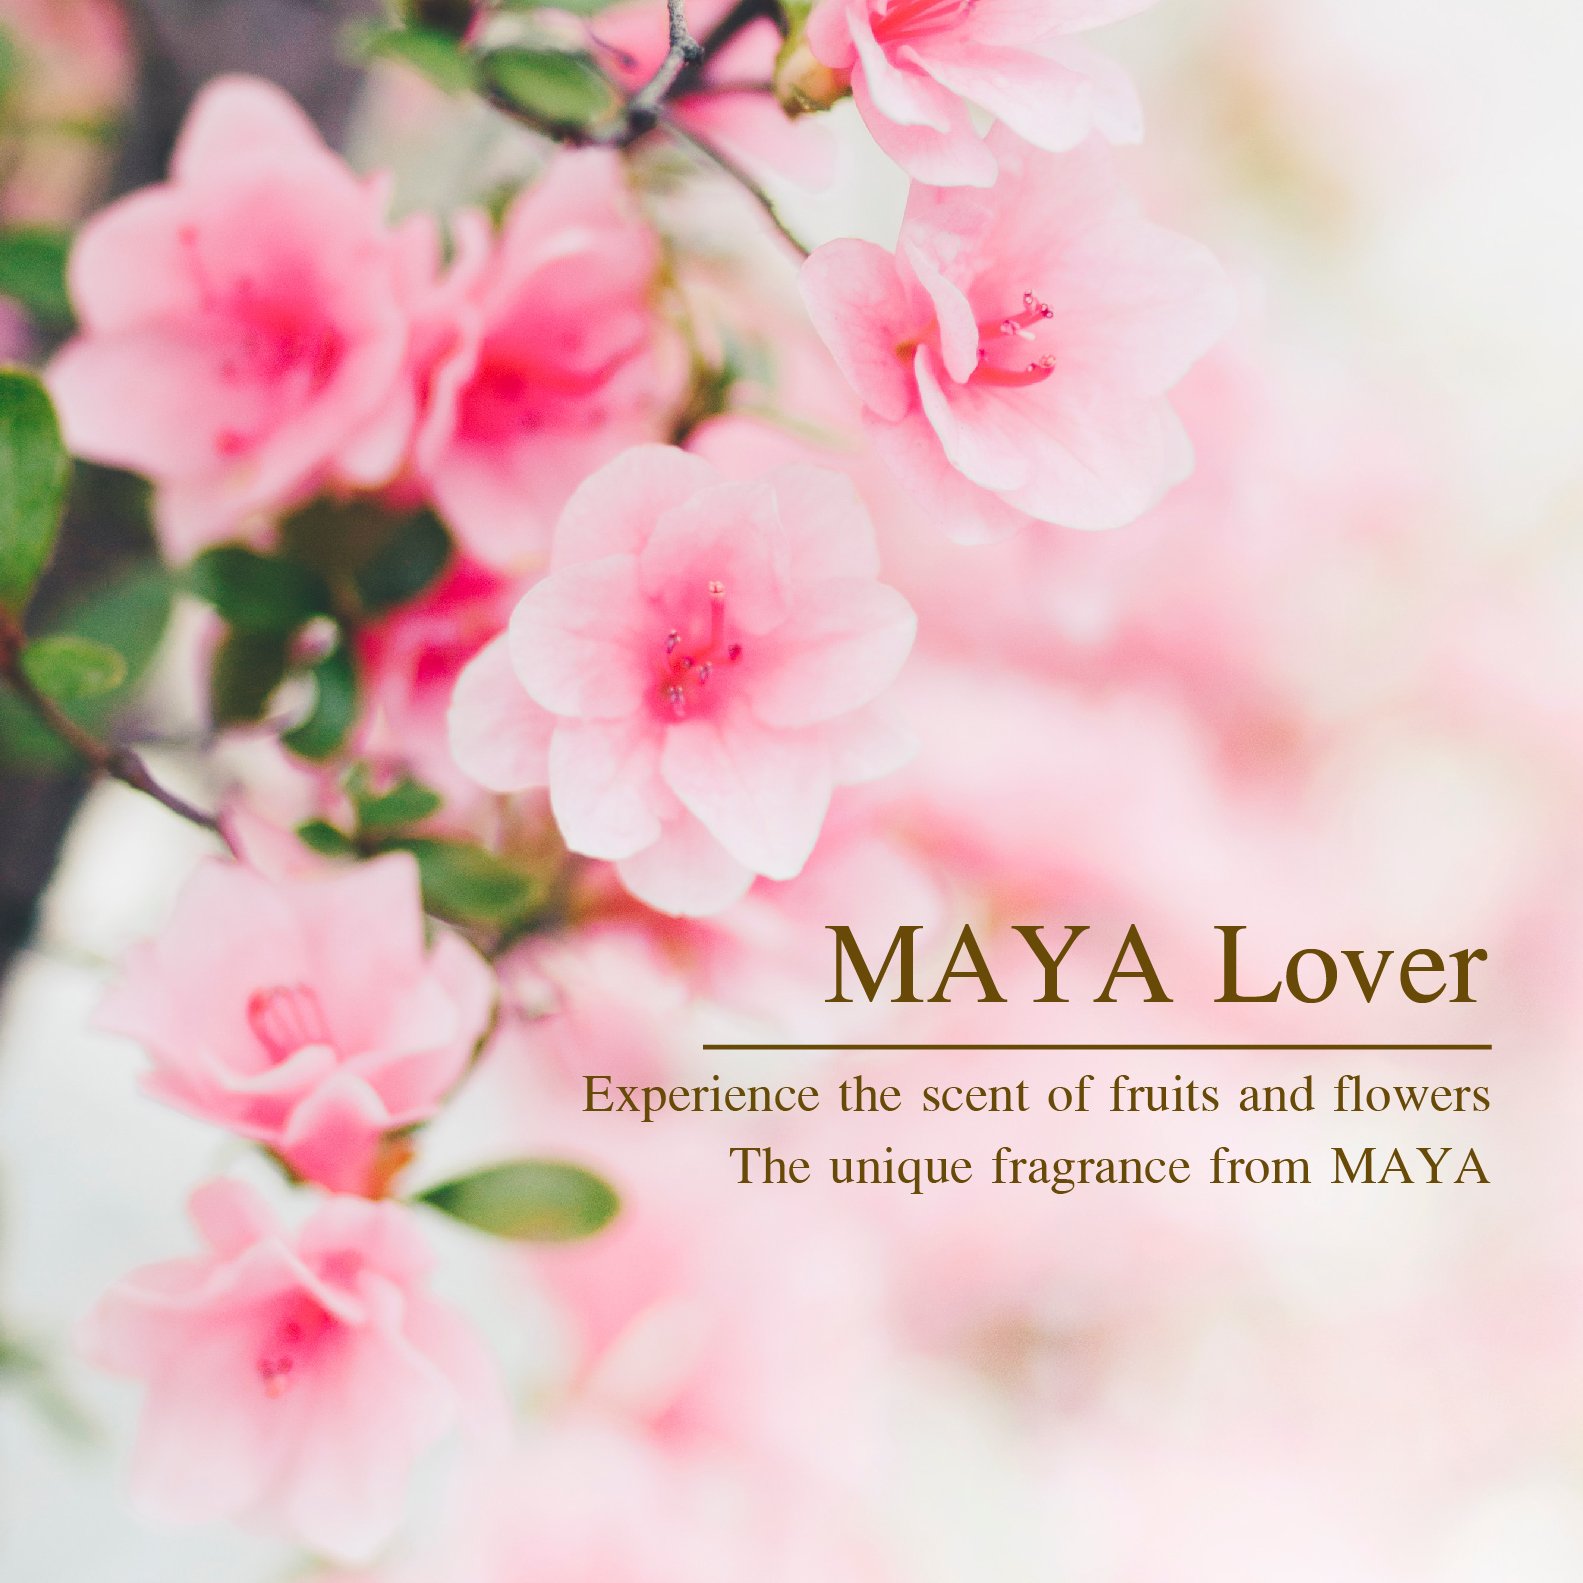 Reed Diffuser "MAYA Lover" Experience the scent of fruits and flowers the unique fragrance from MAYA